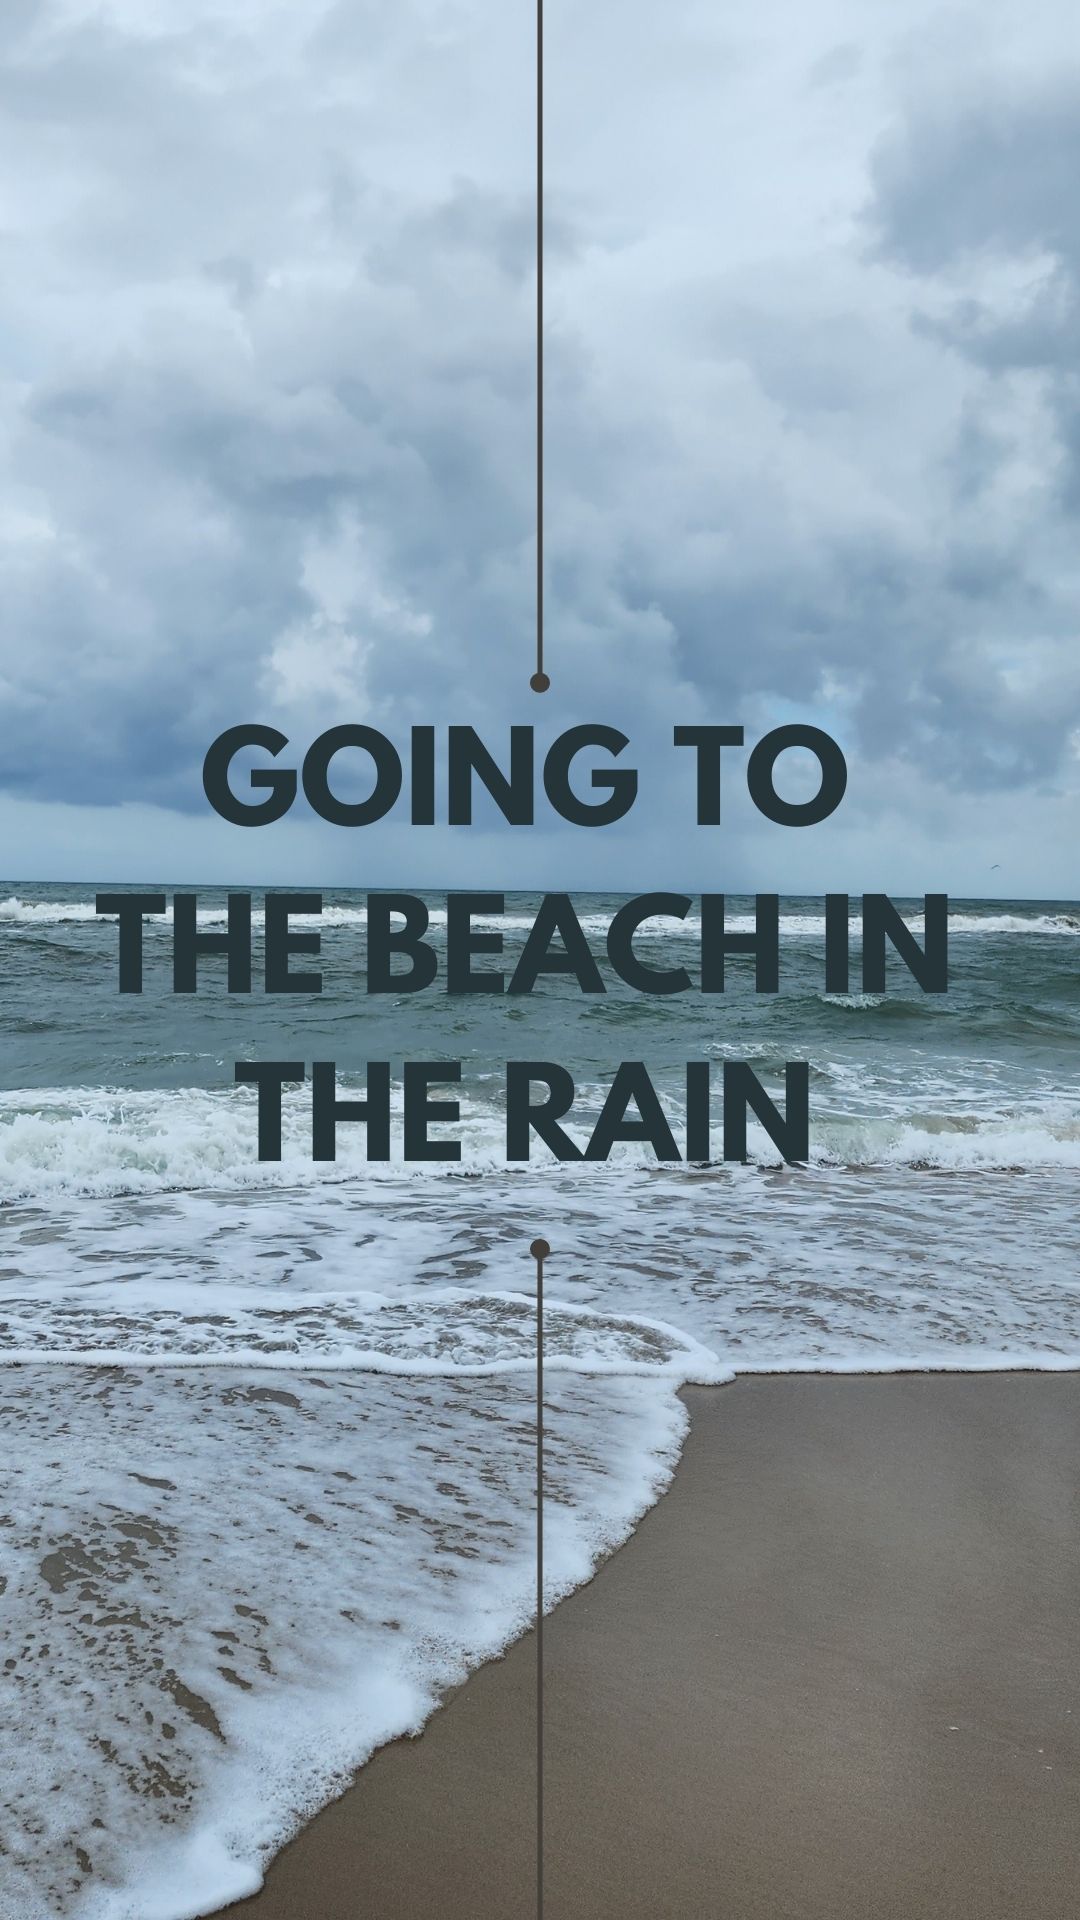 Discover the excitement of walking on the beach during rain and thunderstorms. Join us as we embrace the unexpected downpour and explore the hidden gems amidst stormy weather. From a bizarro house-like structure to breathtaking storm clouds, our beach adventure was unforgettable. Immerse yourself in the thrill of the moment and get inspired by our escapade! 🌧️⚡️ #RainyBeach #Adventure #StormyDelight #BeachExploration